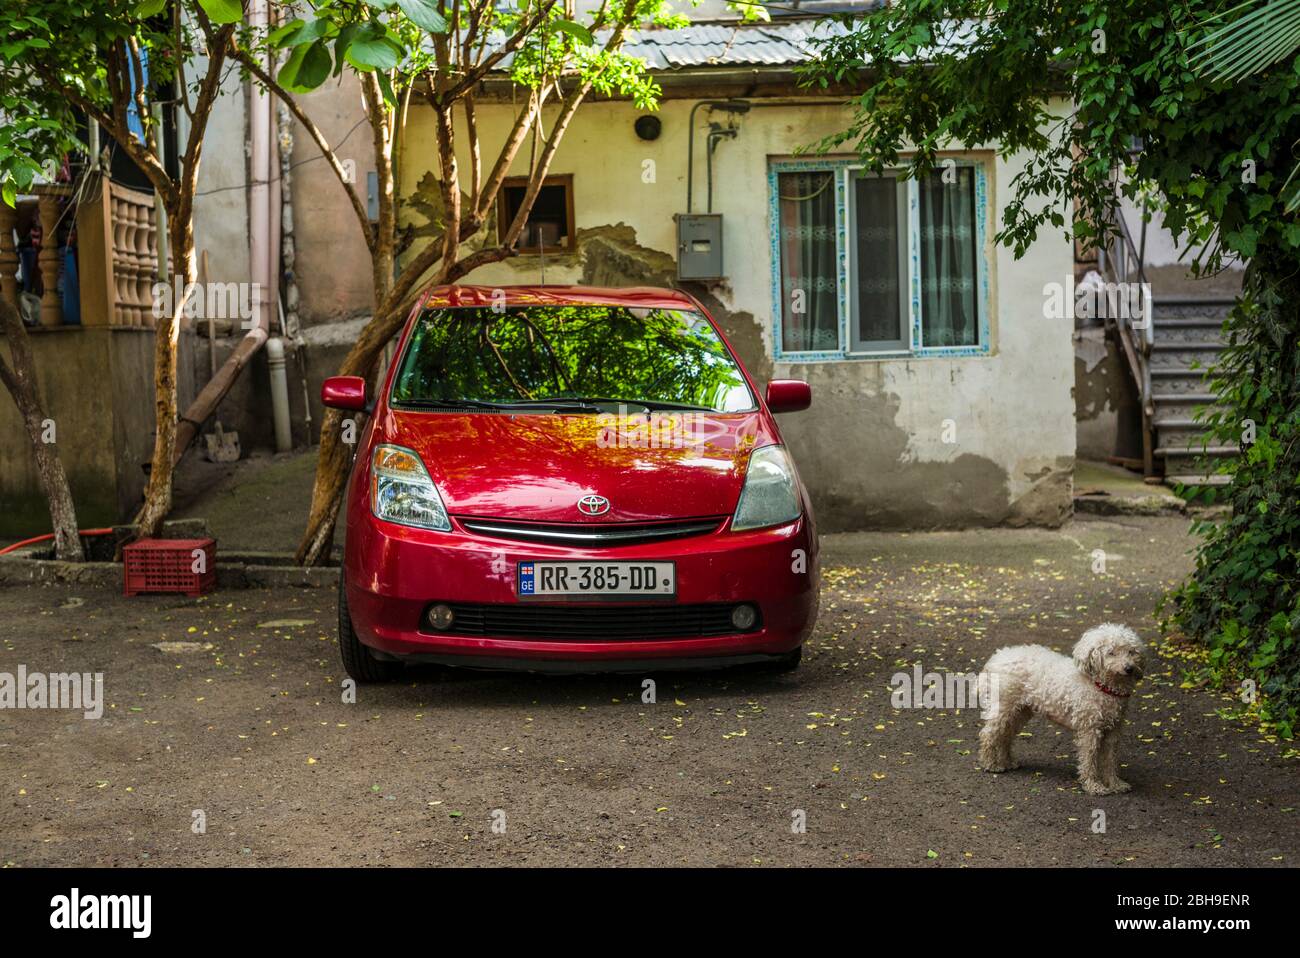 Georgia, Tbilisi, Old Town, courtyard with Prius car and dog Stock Photo